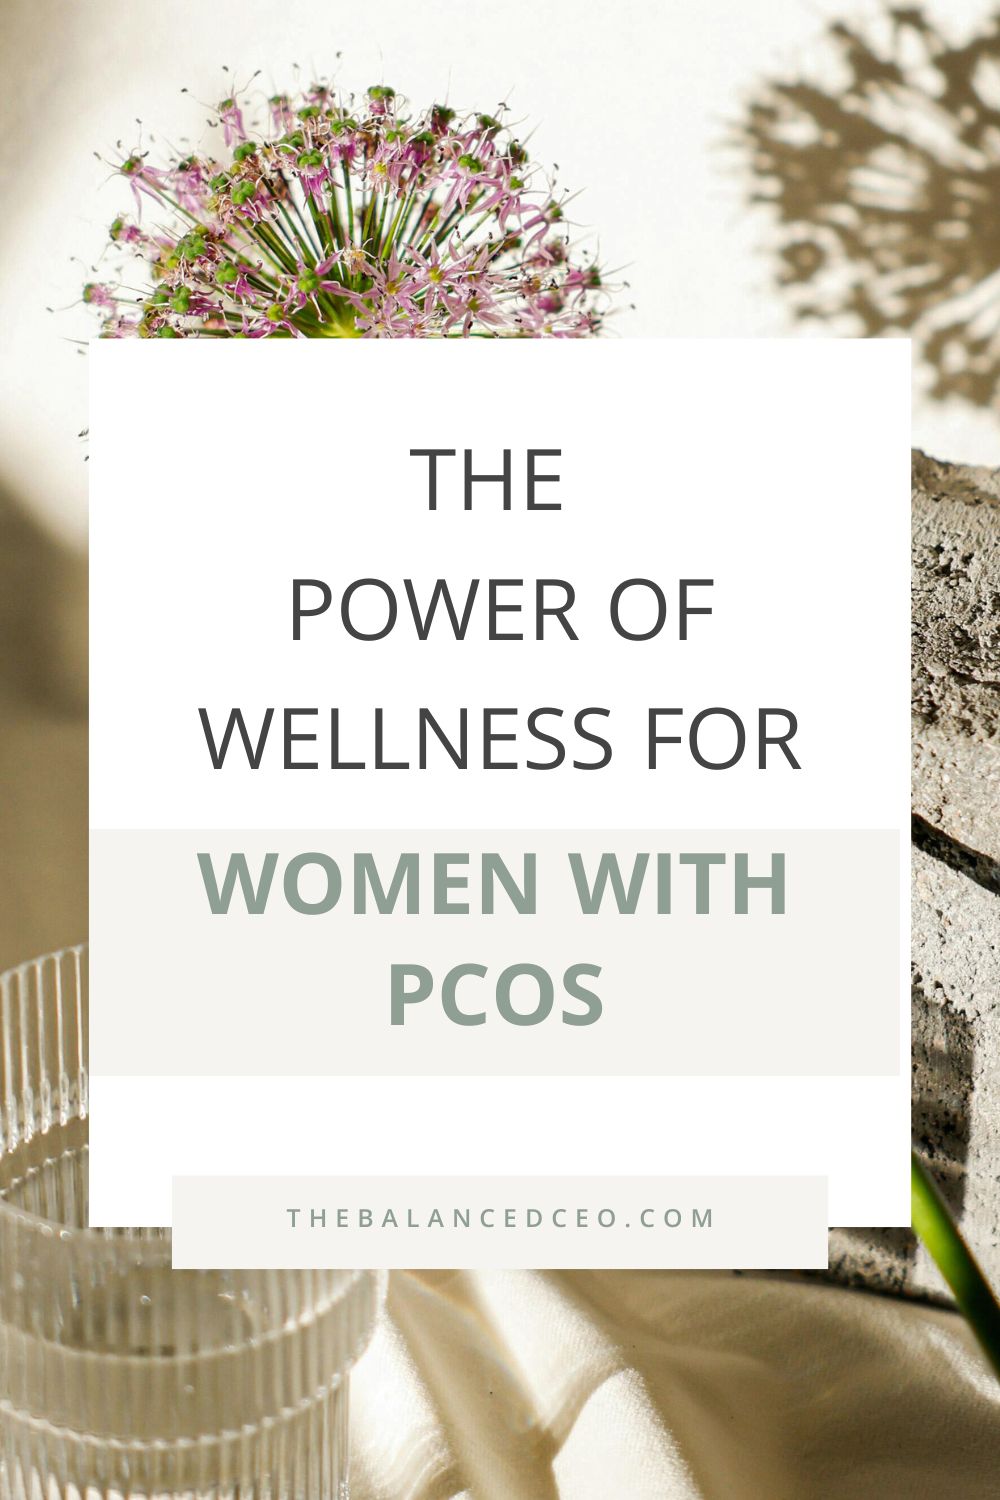 The Power of Wellness for Women with PCOS